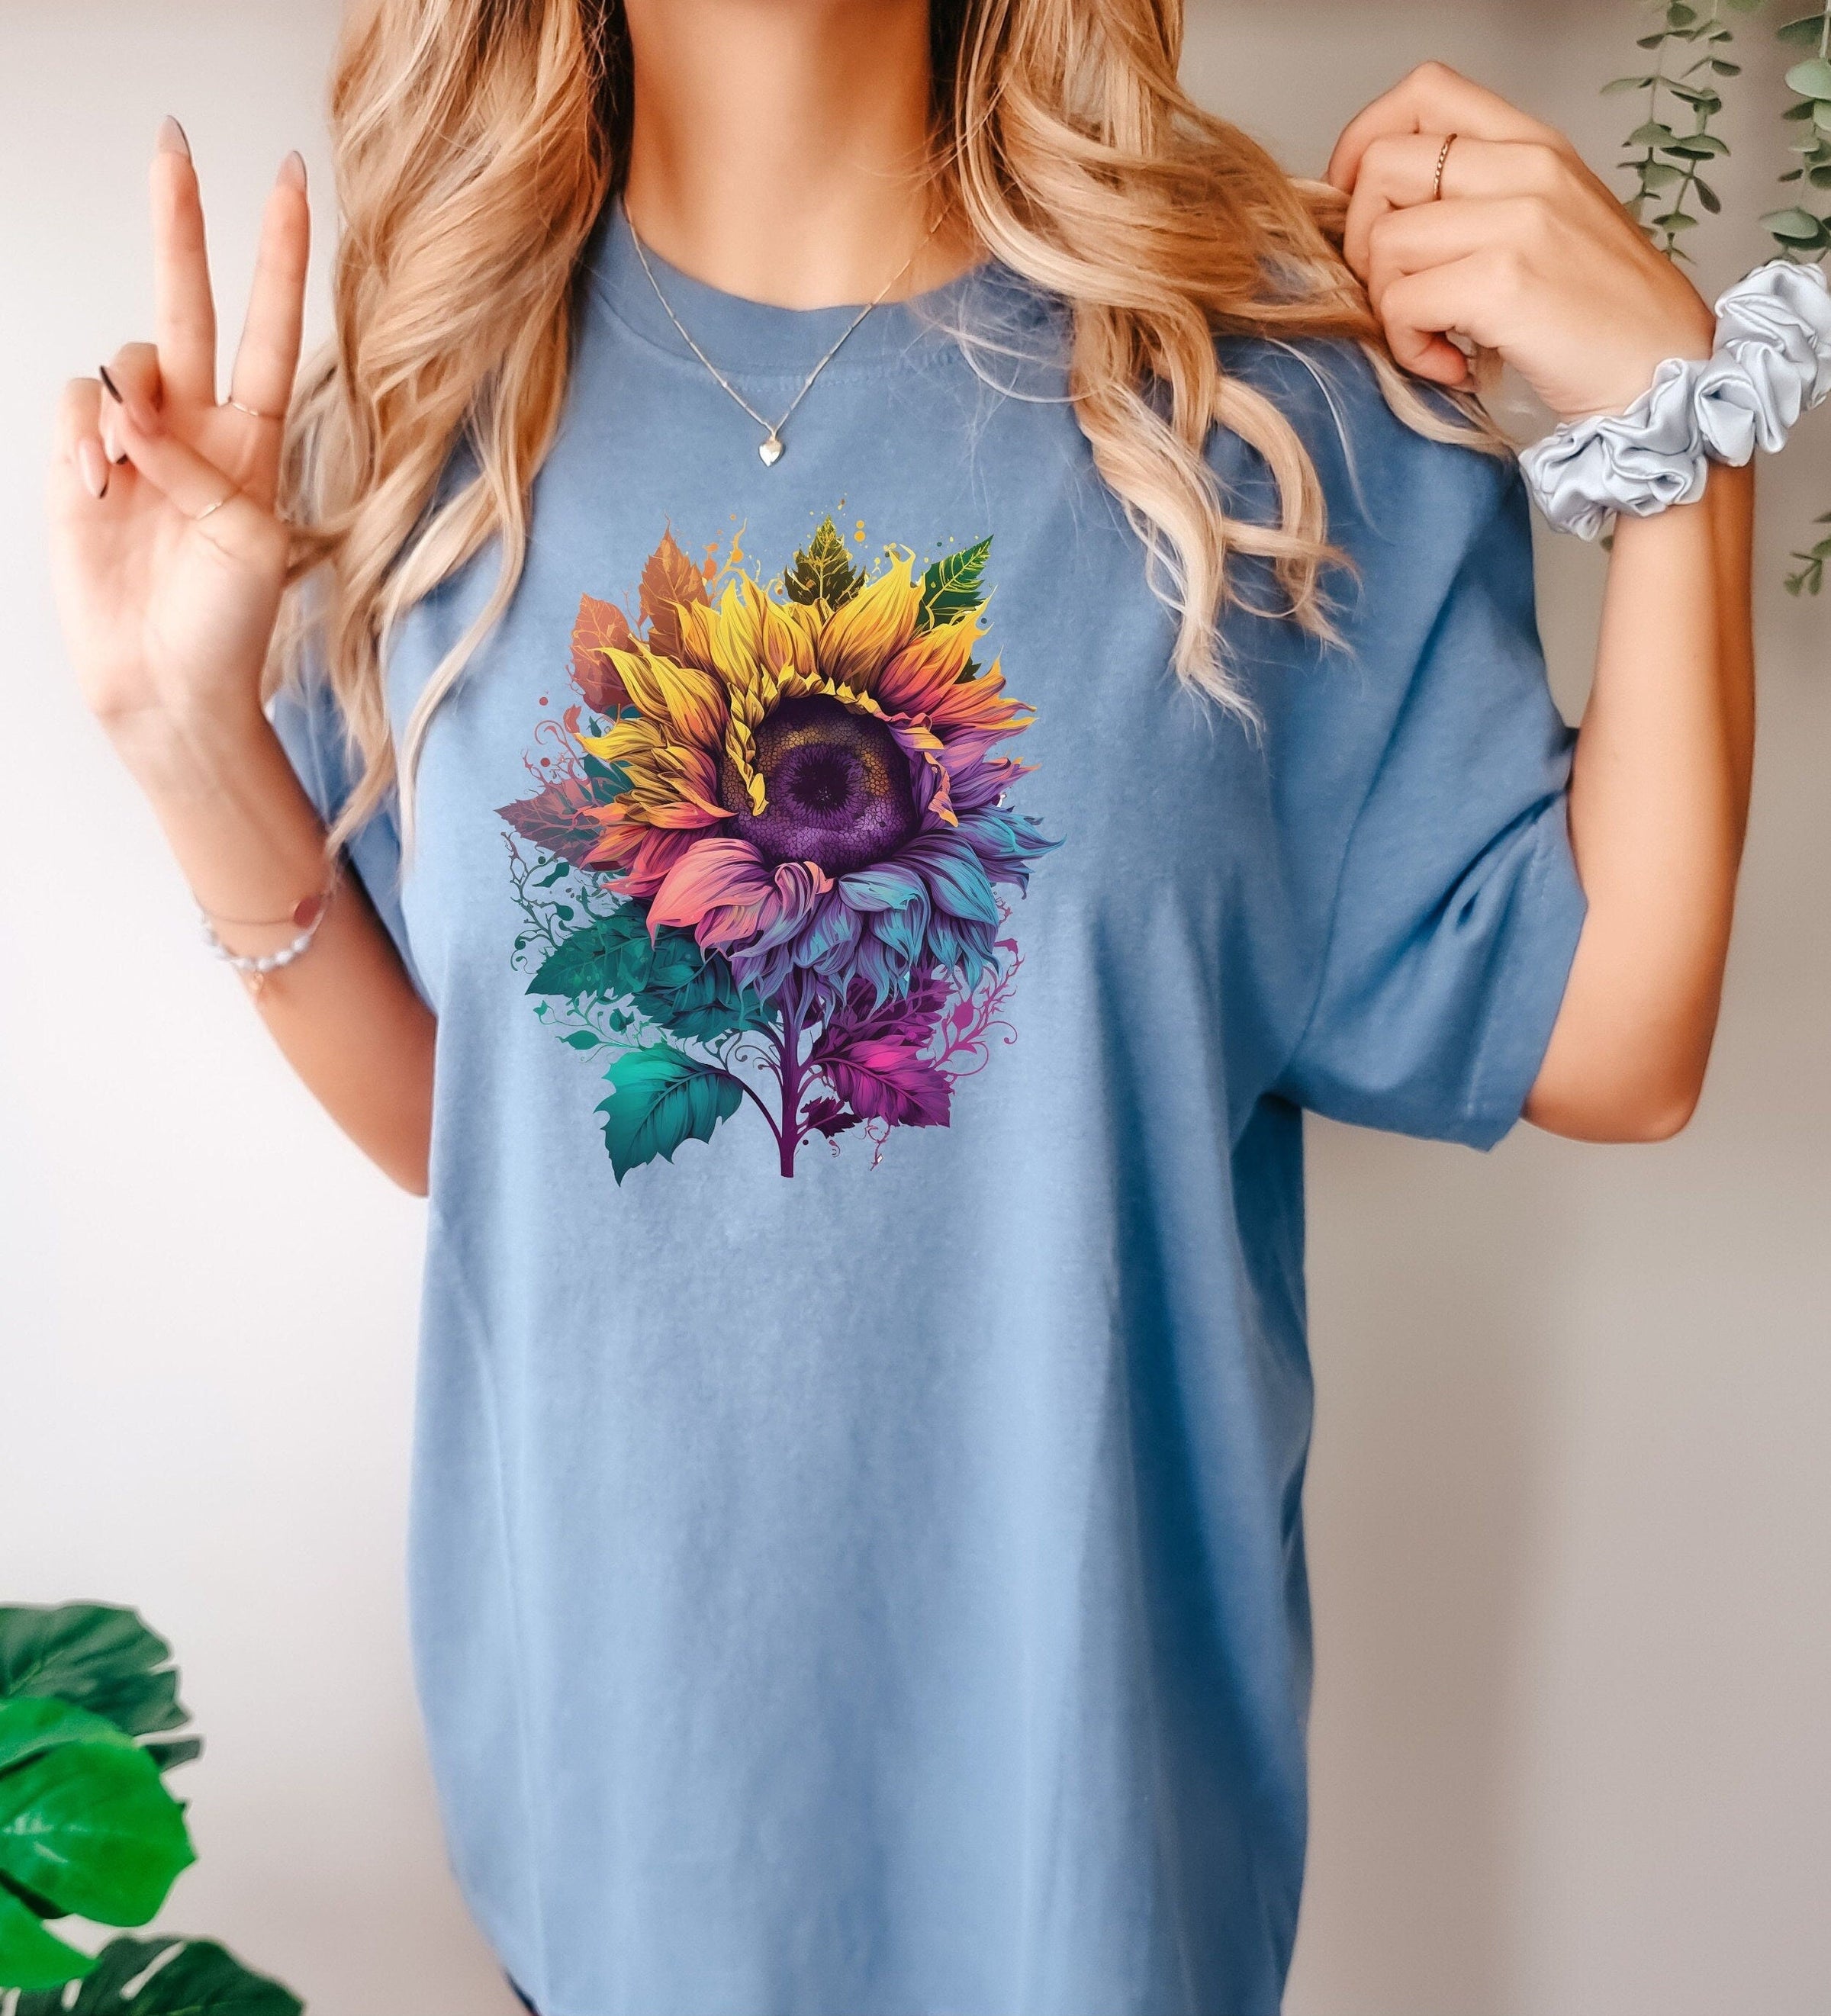 Floral Shirt, Comfort Colors® 1717, Oversized Tee